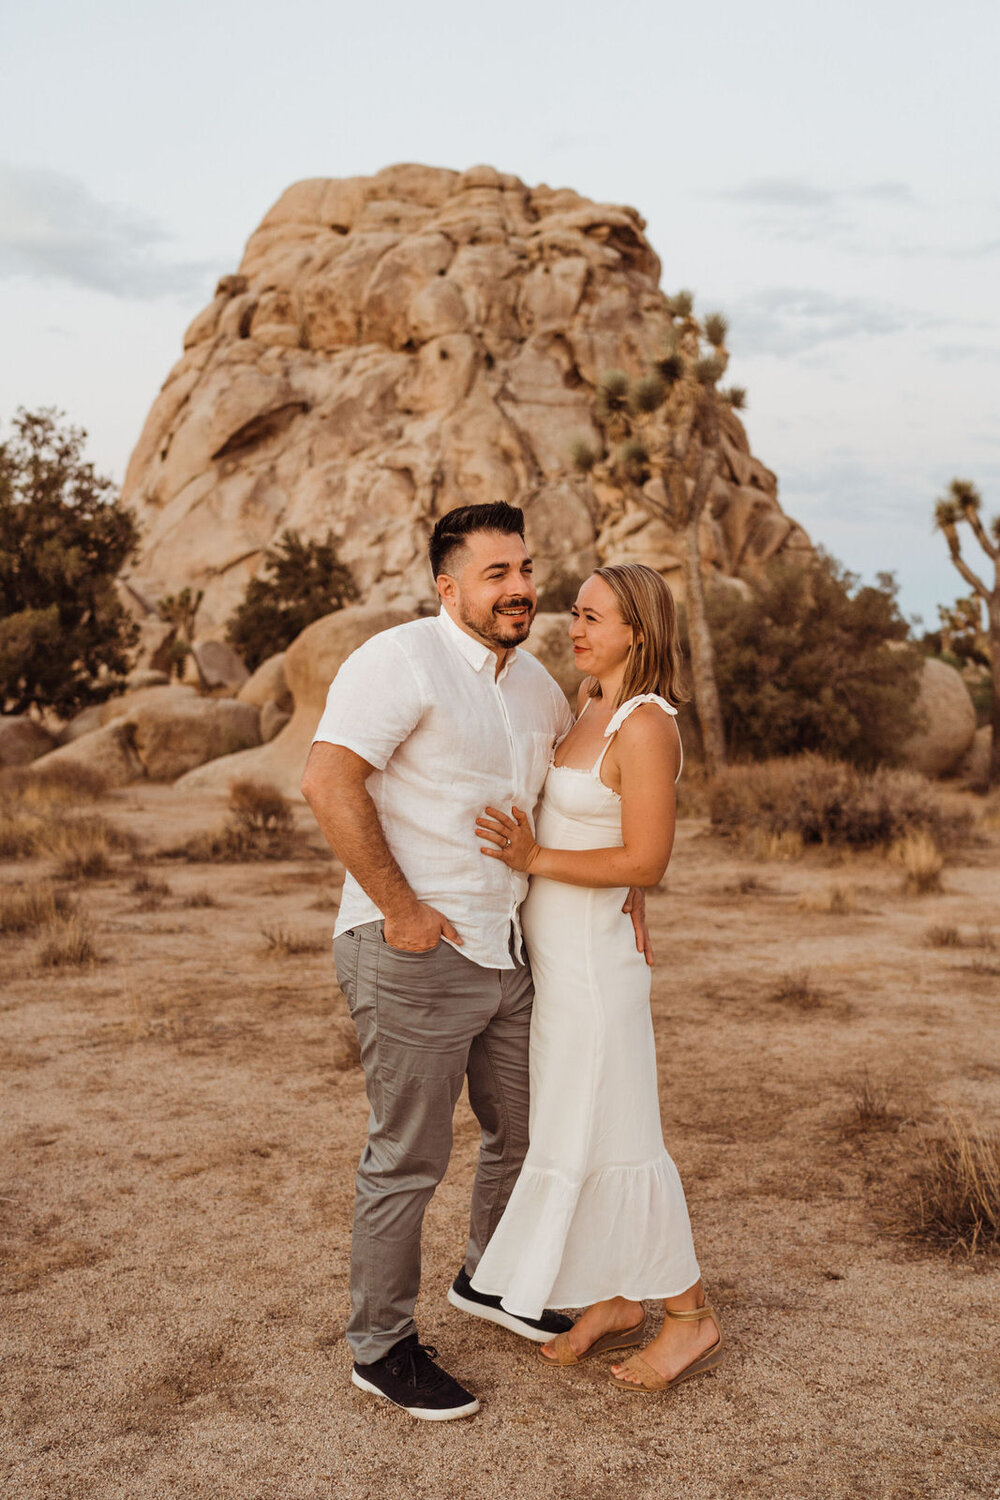 Sunrise Engagement Session in Joshua Tree, California - Couple stands in the desert - Photos by Adventurous Elopement + Wedding Photographer Kept Record | www.keptrecord.com